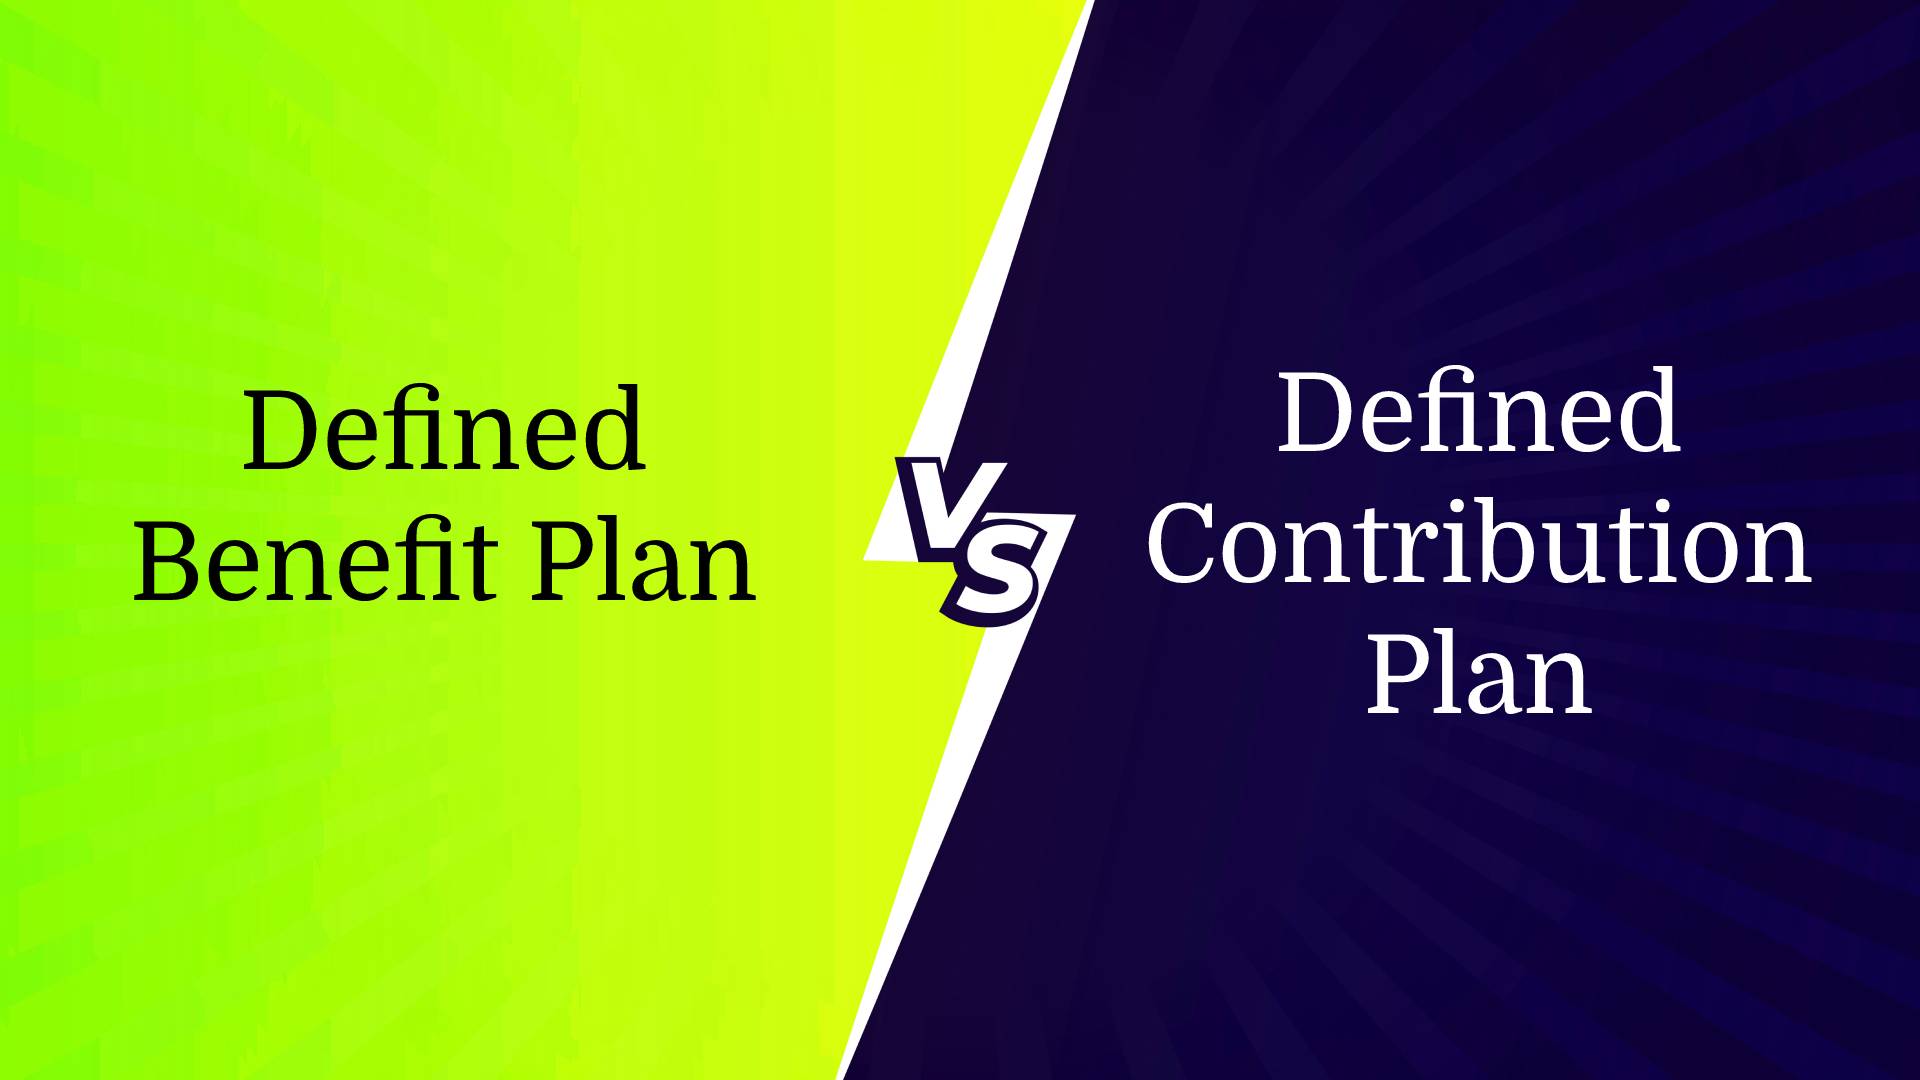 How Are Defined Benefit Plans Different From Defined Contribution Plans How Are They Similar